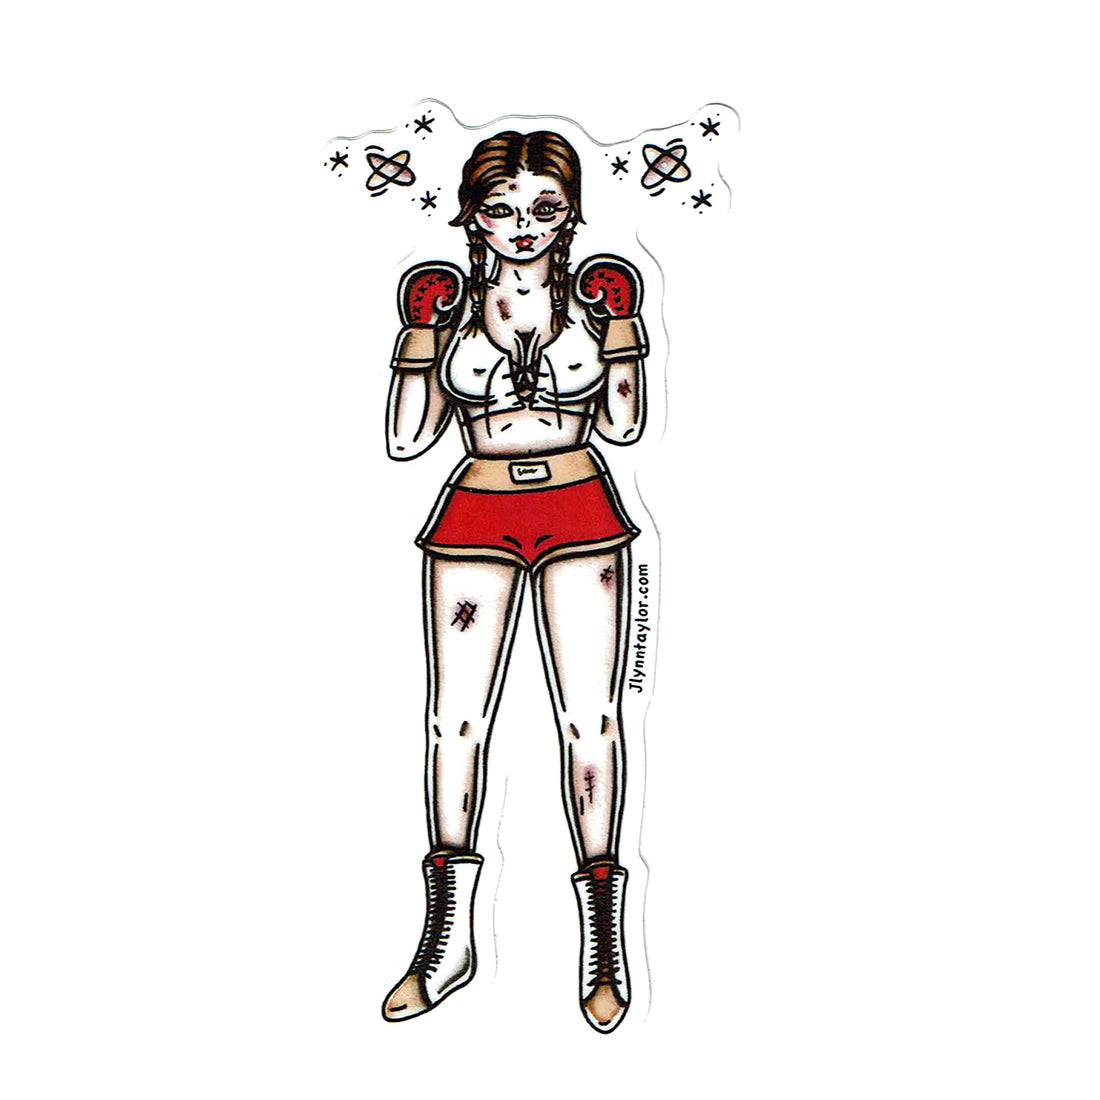 American traditional tattoo flash Boxing Pinup watercolor sticker.